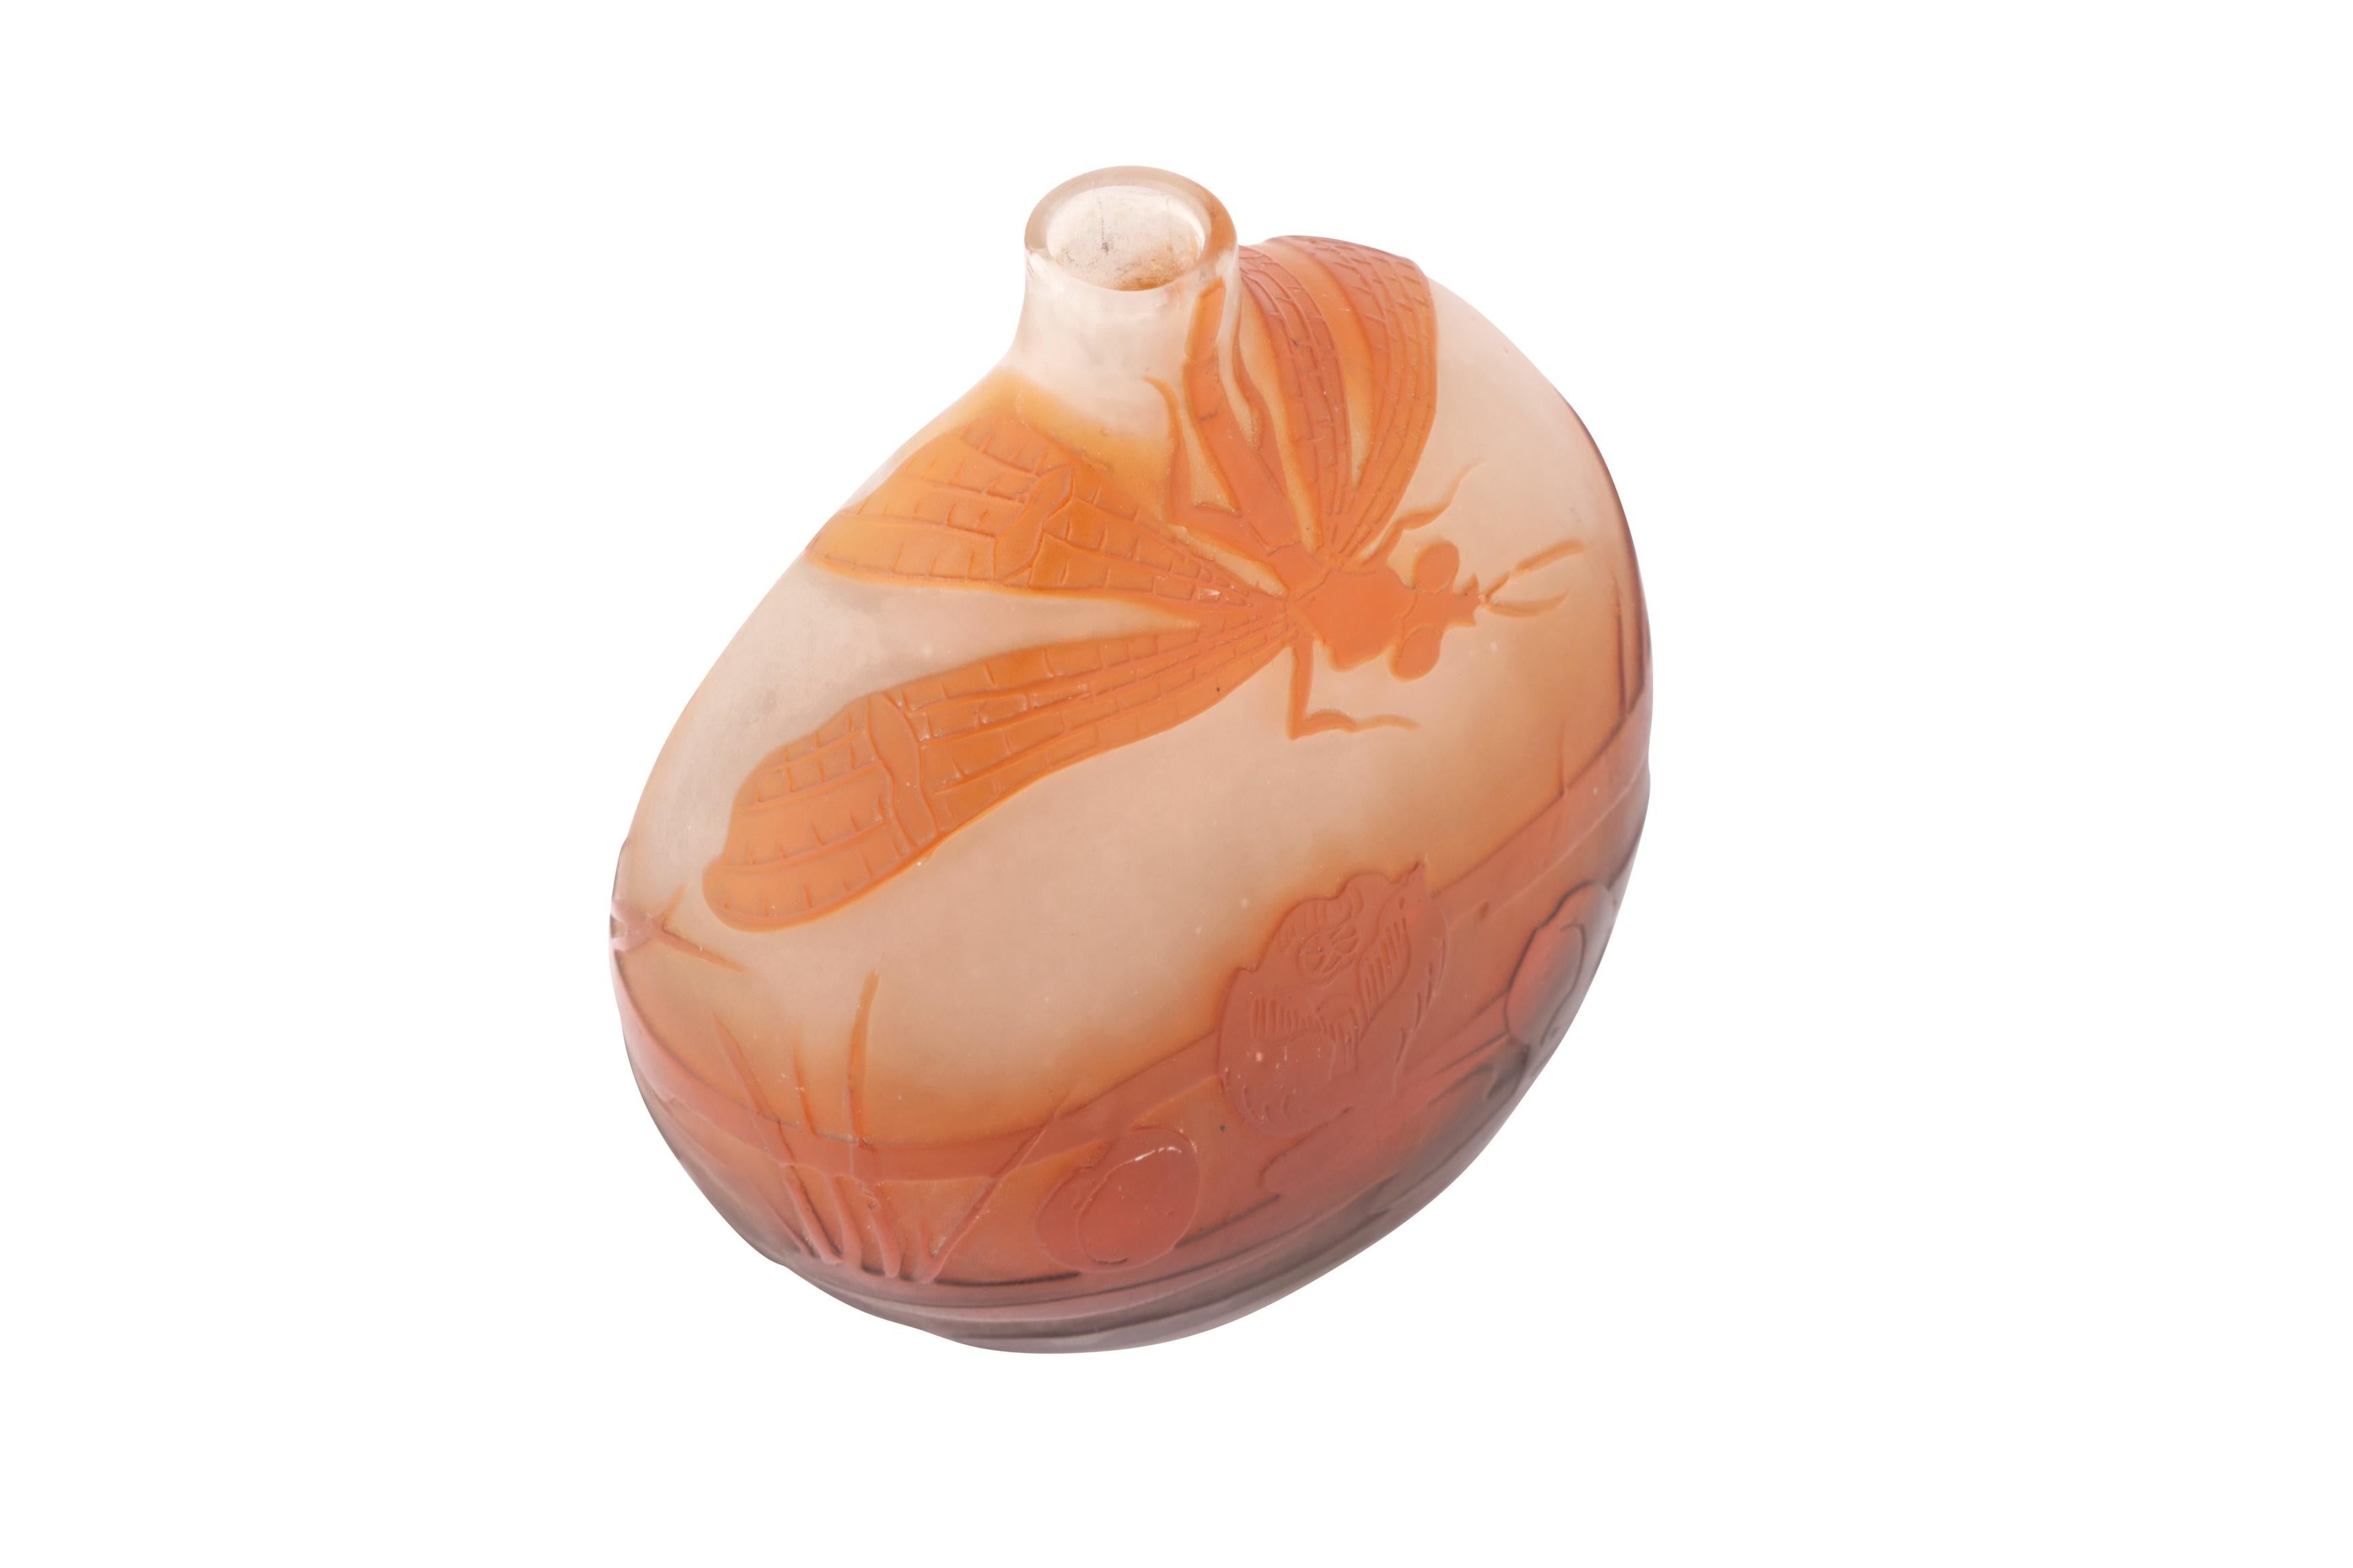 A cameo glass waterlillies and dragonfly vase, of gourd-shaped form, overlaid and acid-etched with a pond landscape scene in tones of amber, signed 'Gallé' in cameo. The glass is warm and glows in the light.

Émile Gallé was a French artist and